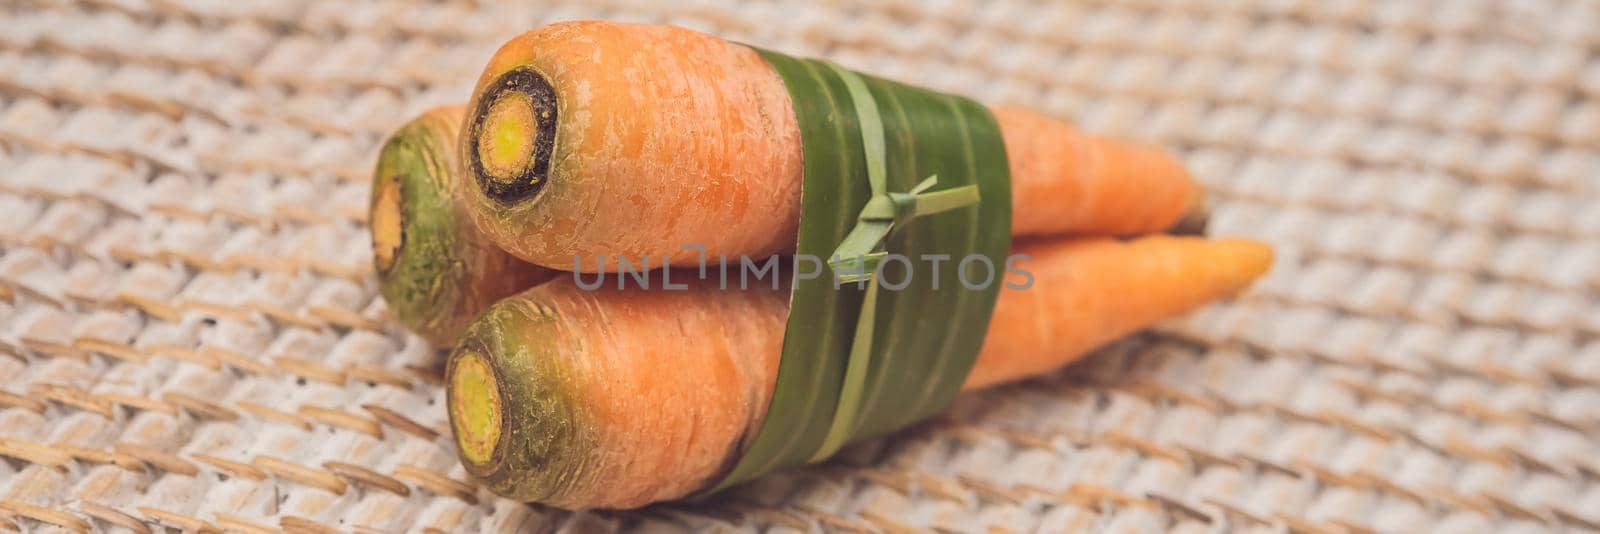 BANNER, LONG FORMAT Eco-friendly product packaging concept. Carrot wrapped in a banana leaf, as an alternative to a plastic bag. Zero waste concept. Alternative packaging by galitskaya